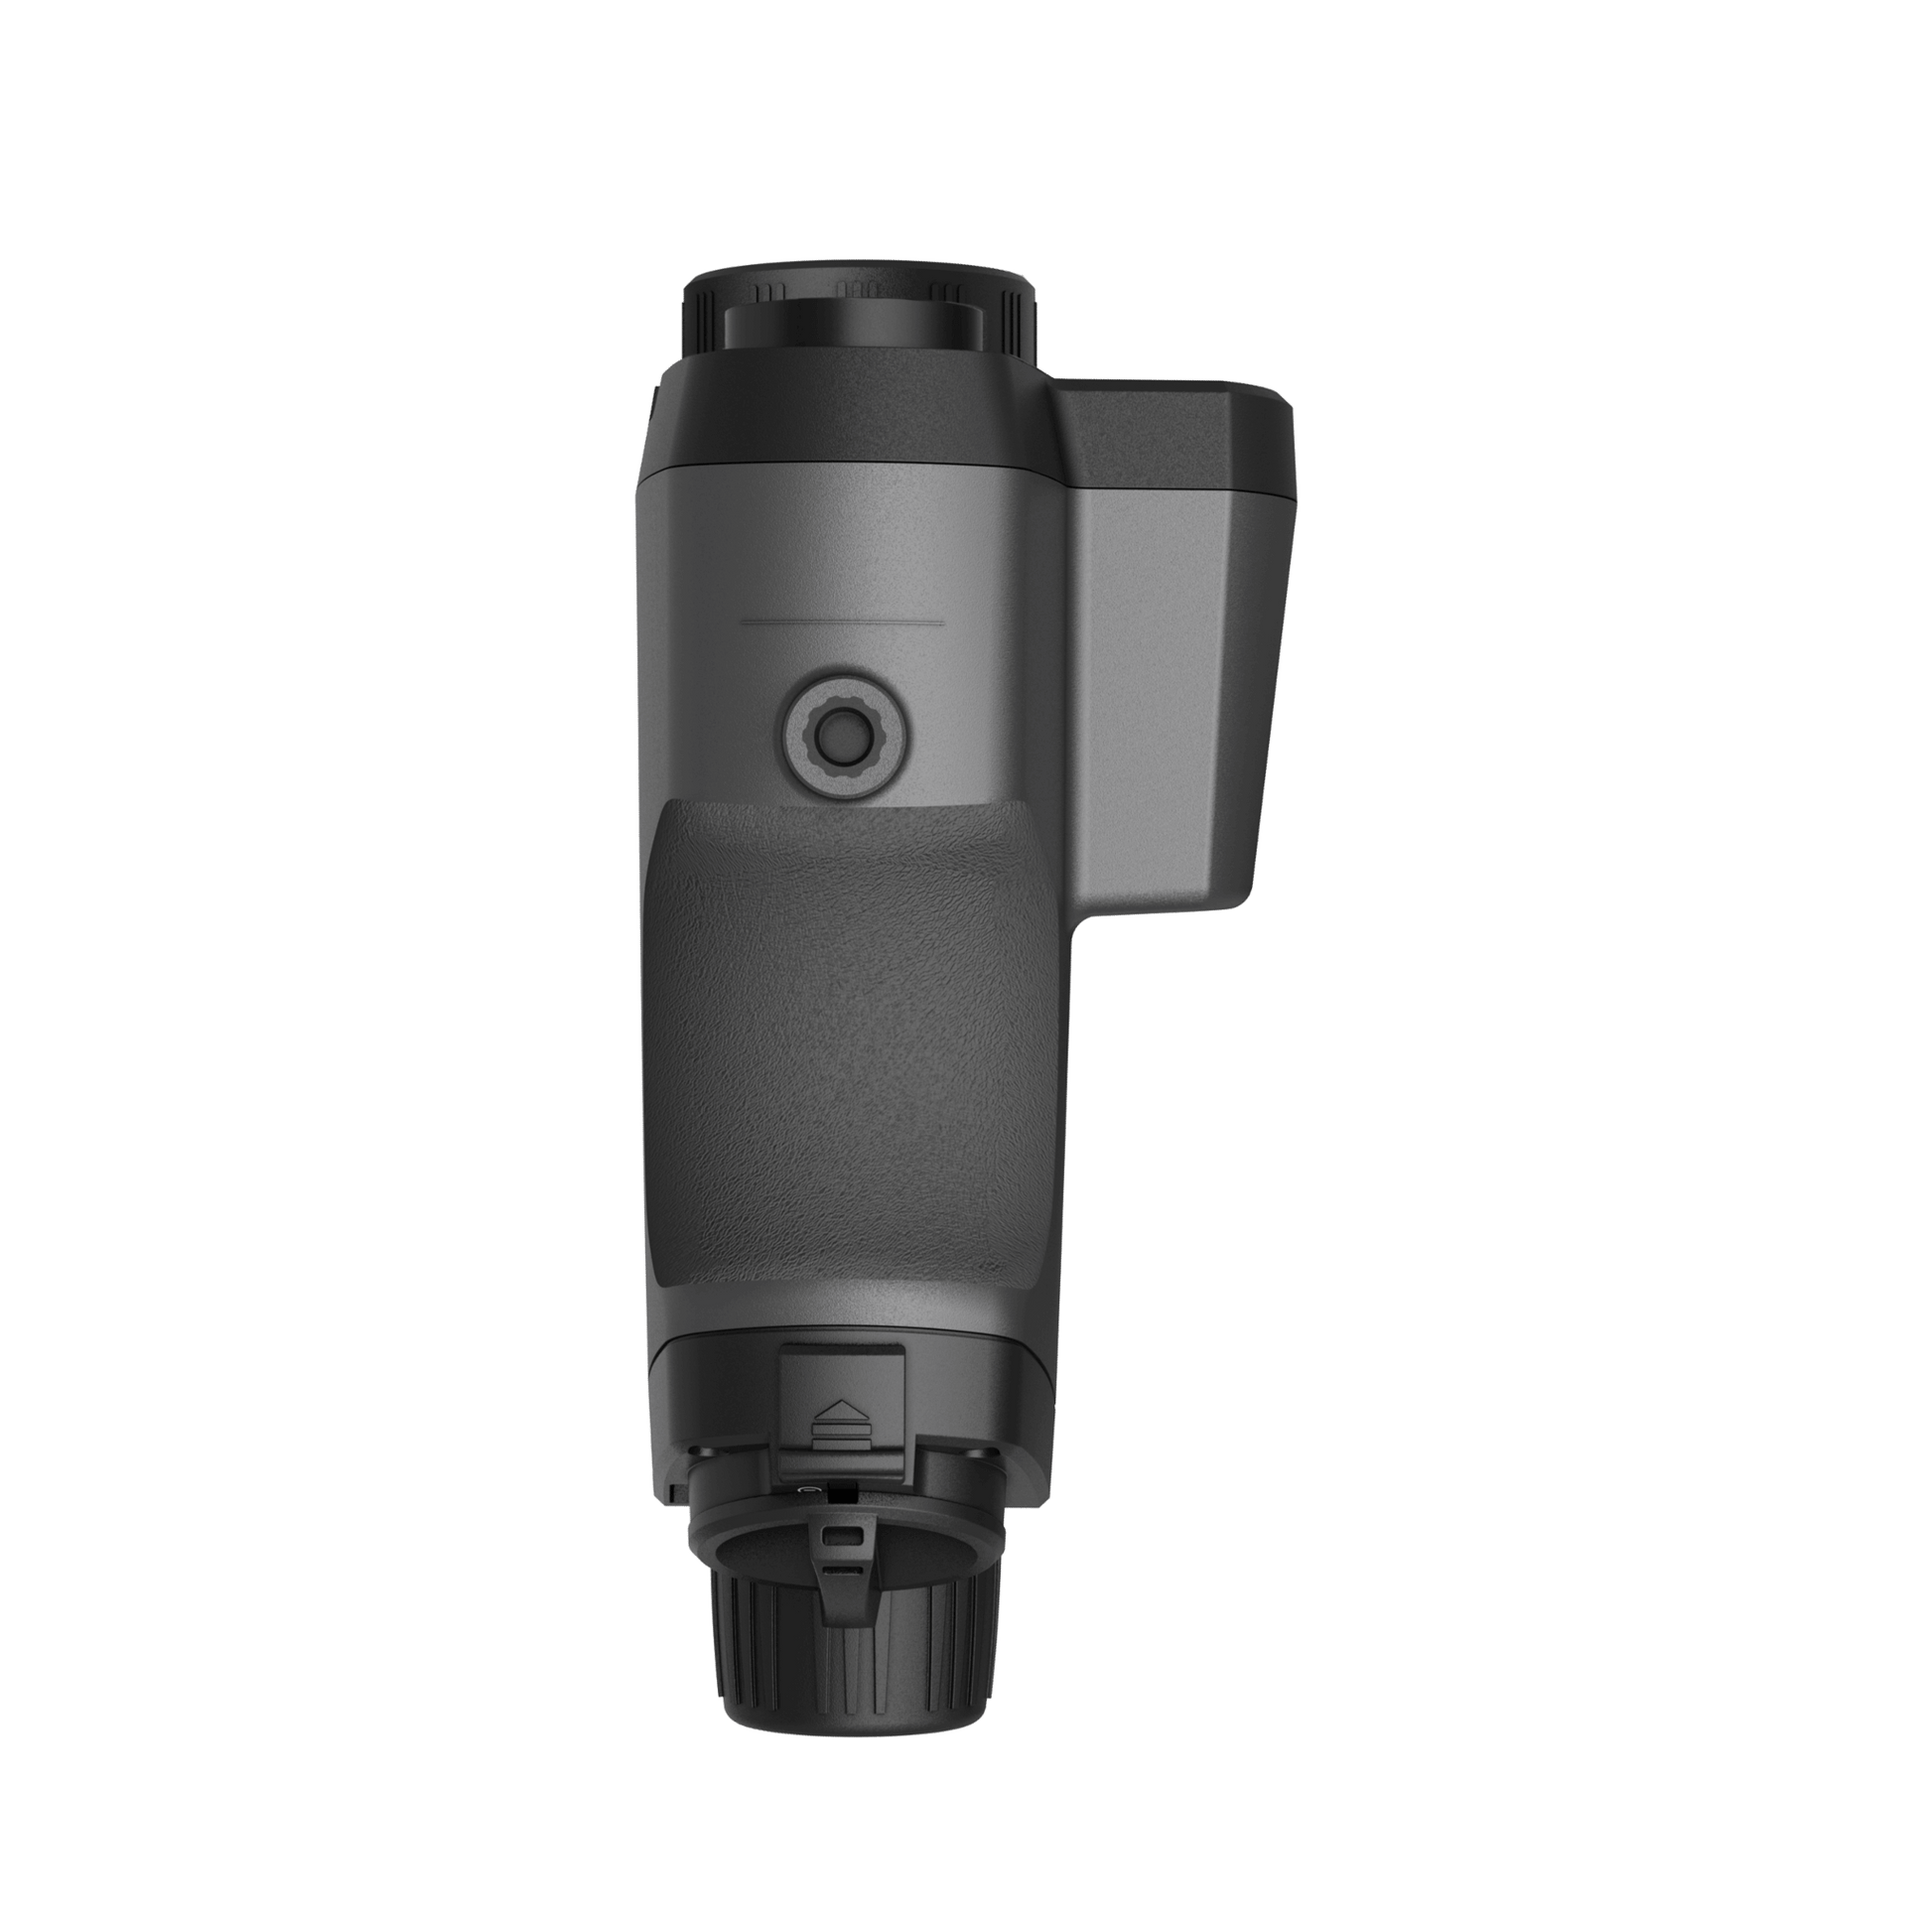 Cape Thermal imaging monocular for sale - HikMicro Gryphon GH25L Handheld thermal monocular bottom view